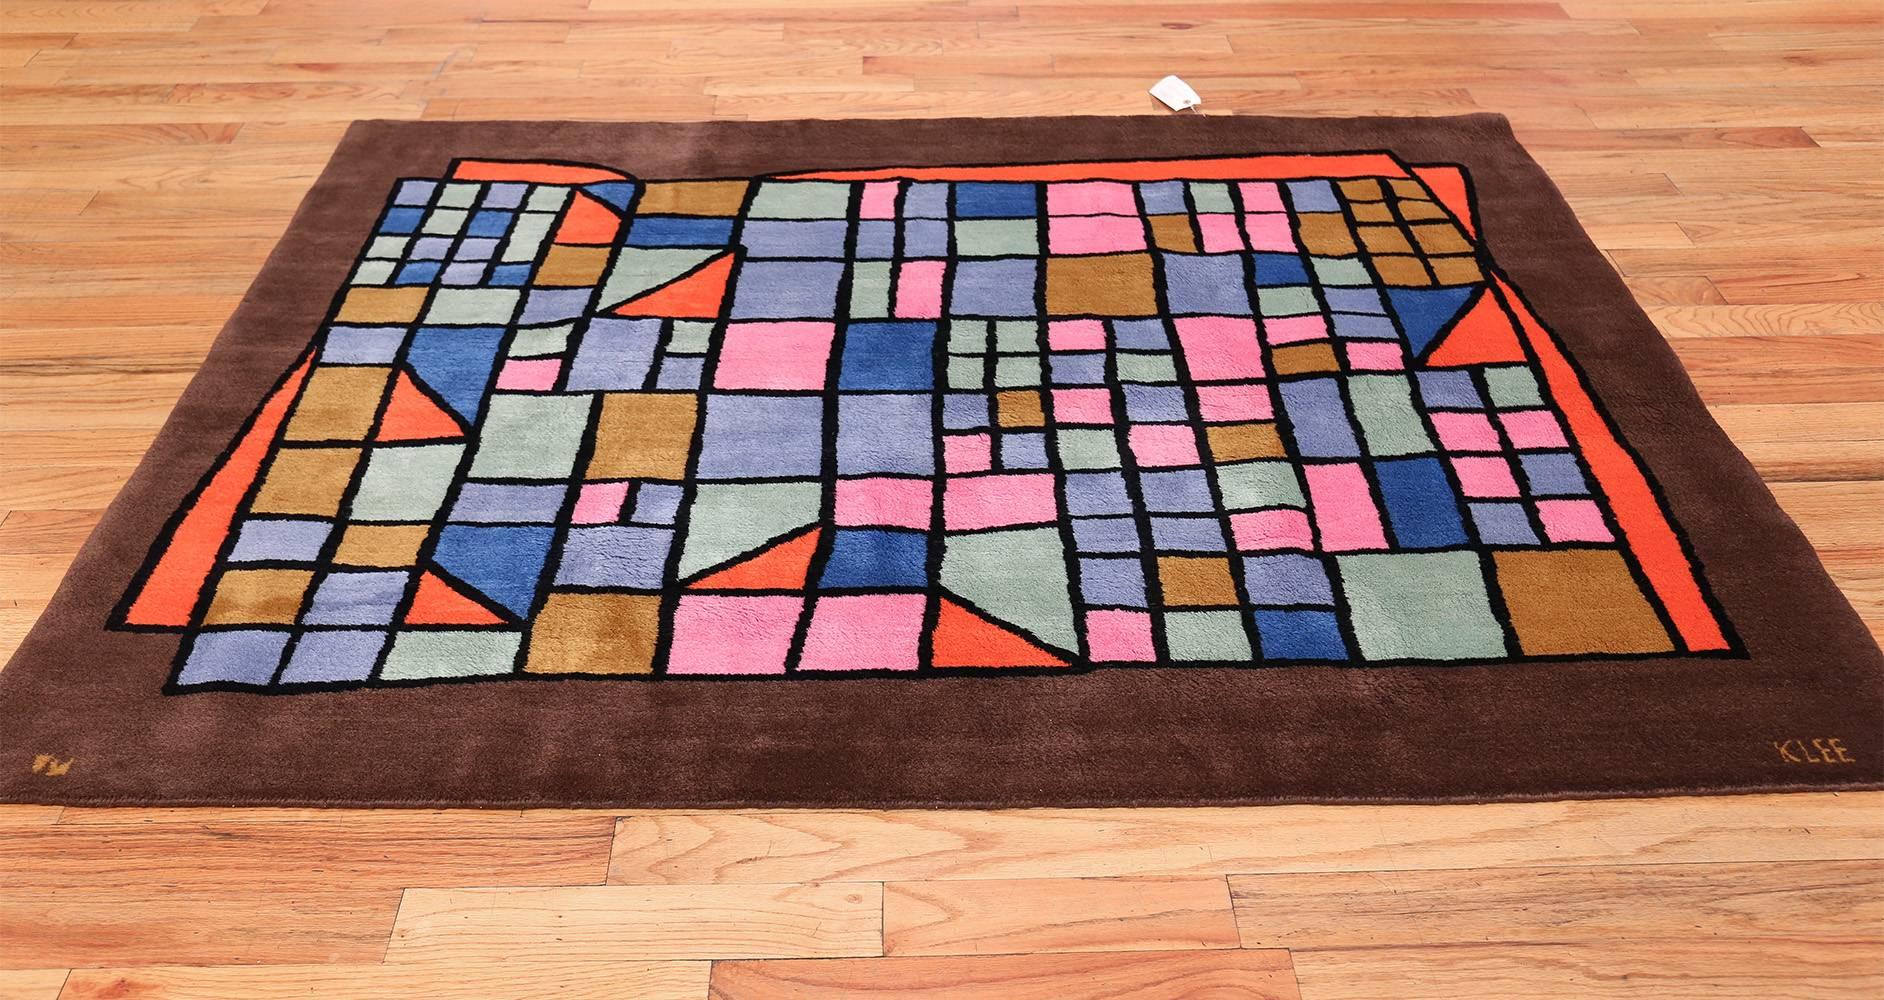 Magnificent And Extremely Artistic Vintage French Paul Klee Art Rug, Country of Origin / Rug Type: French Rug, Circa Date: 1970 – The asymmetrical polygons of this Paul Klee art rug, resemble layered colorful porcelain mosaics all layered one atop